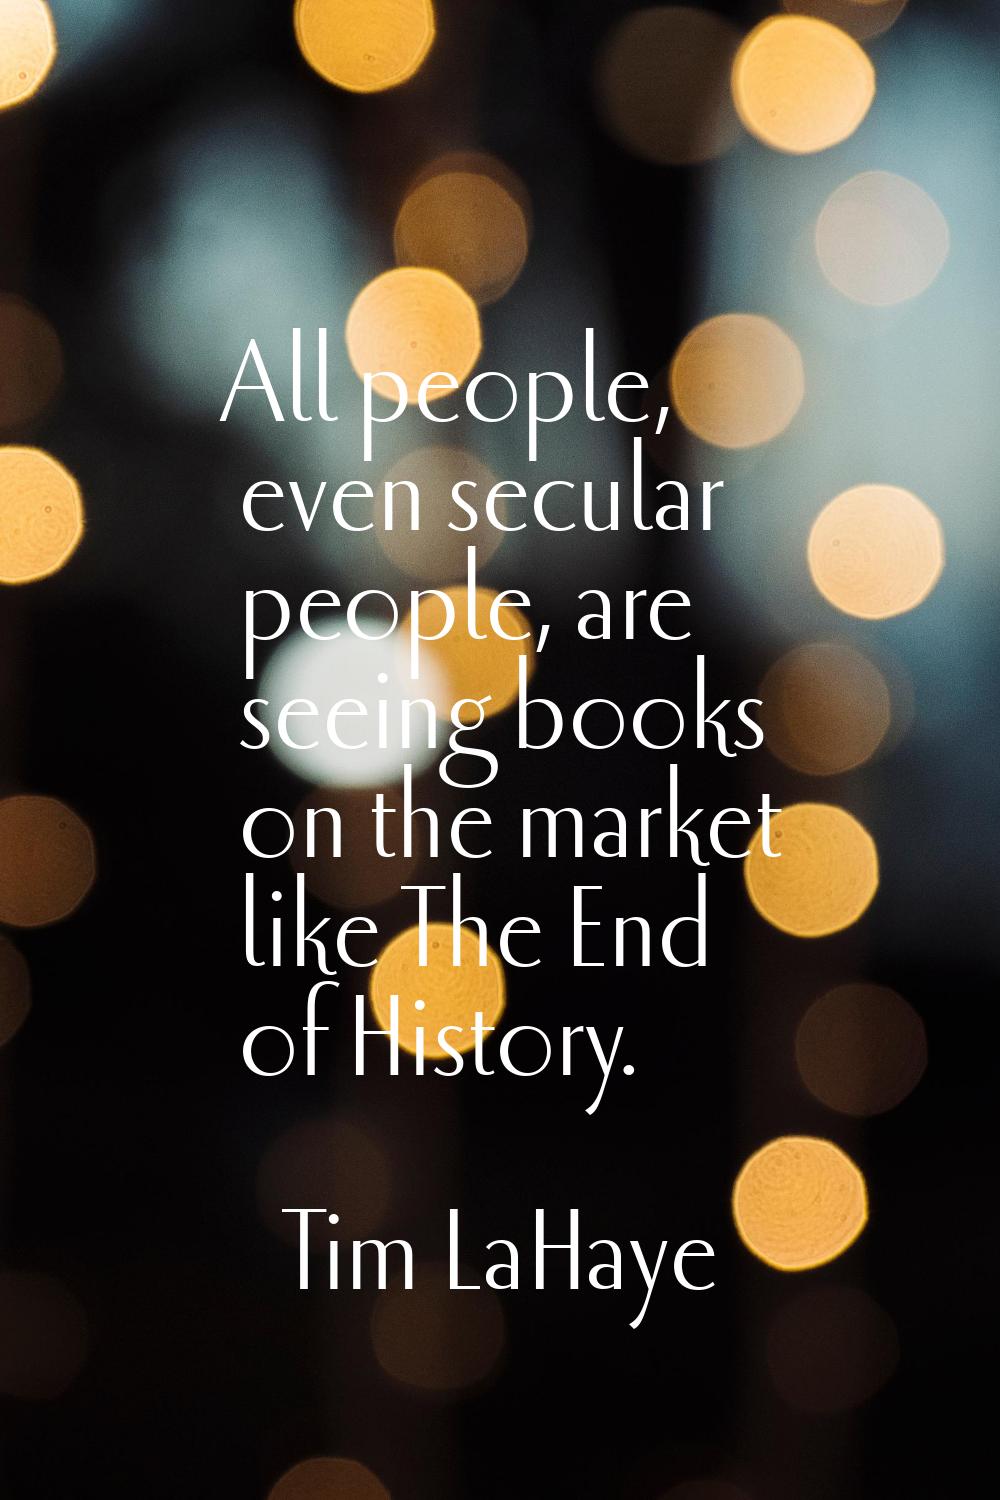 All people, even secular people, are seeing books on the market like The End of History.